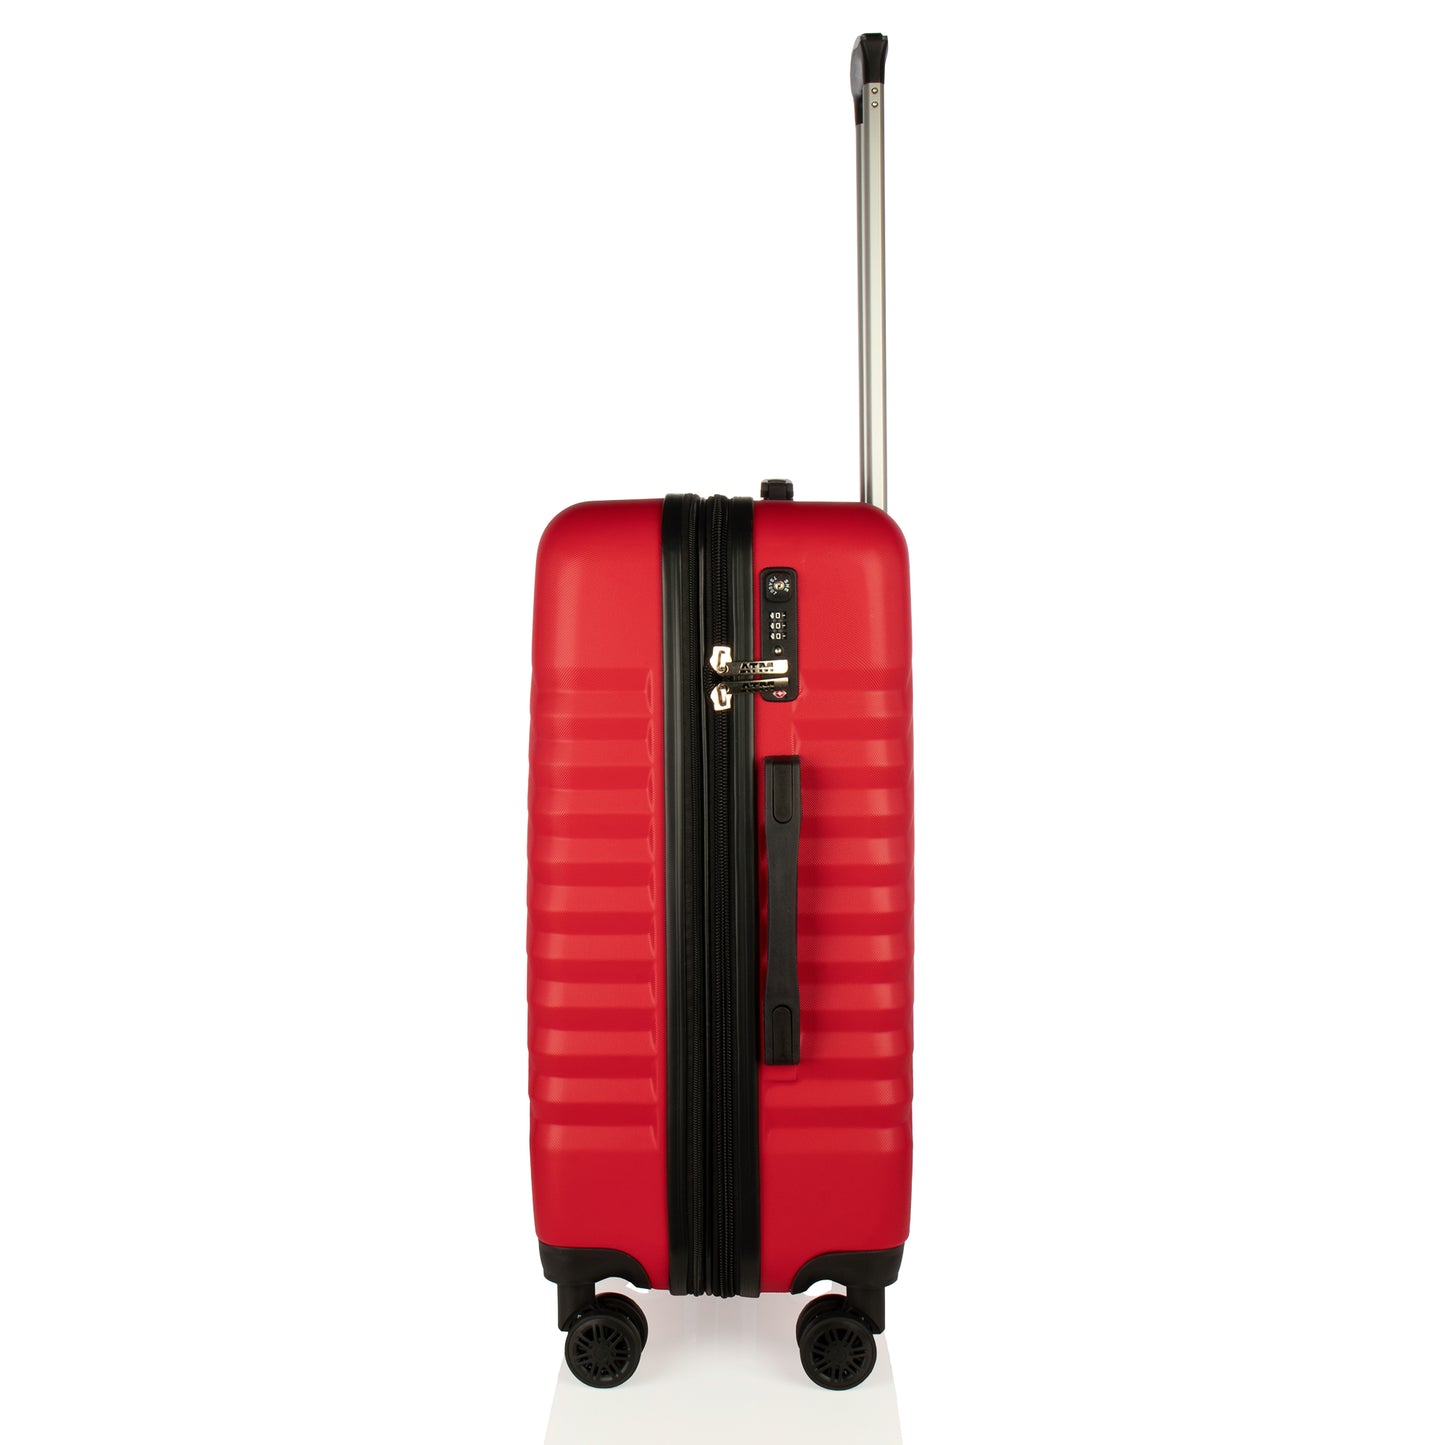 ATM Luggage 3 Piece Set (20/24/28") Suitcase Lock Spinner Hardshell Core Collection Red